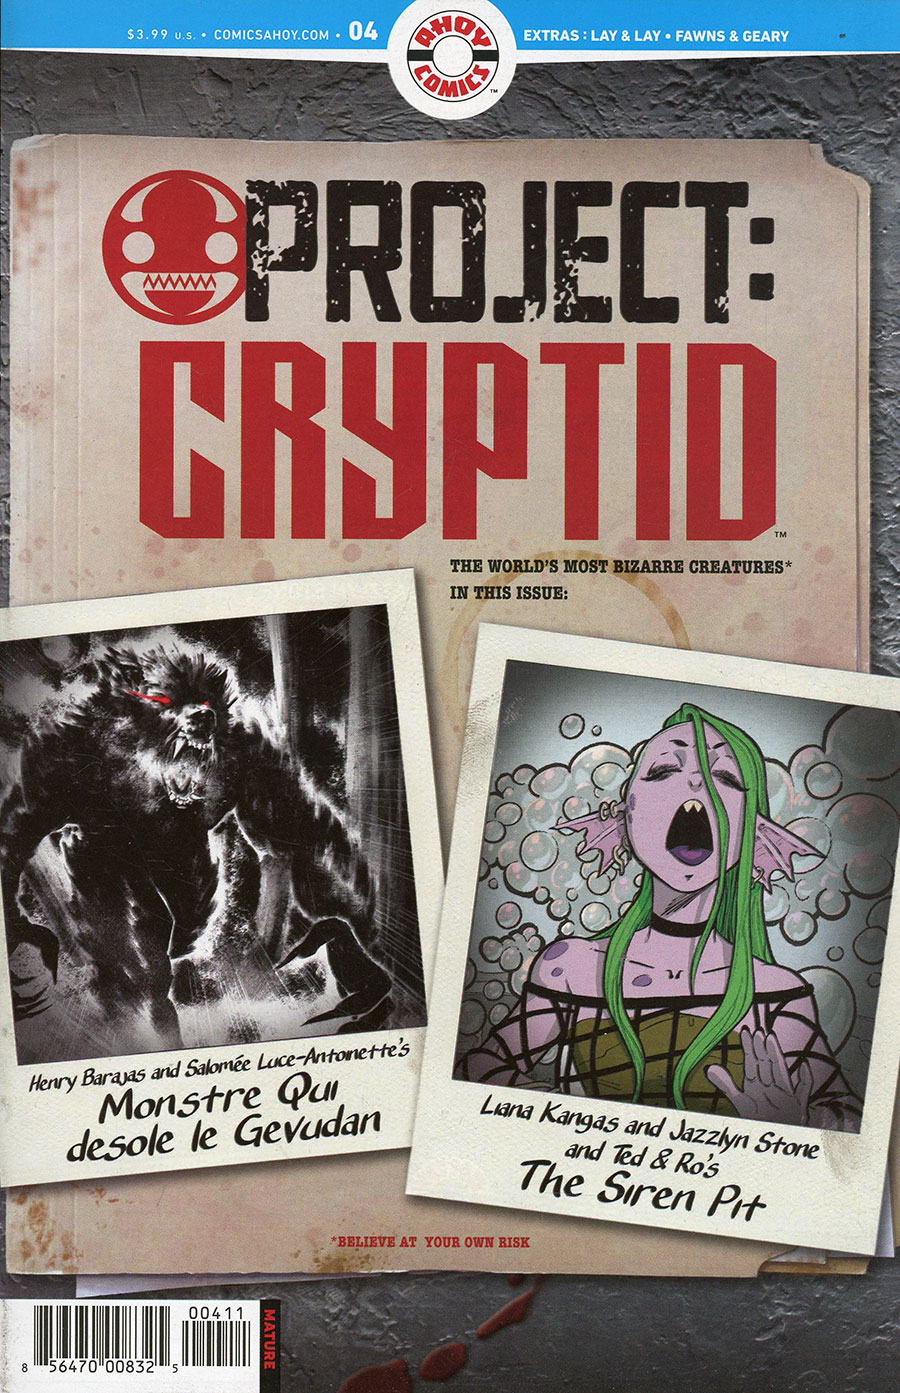 Project Cryptid #4